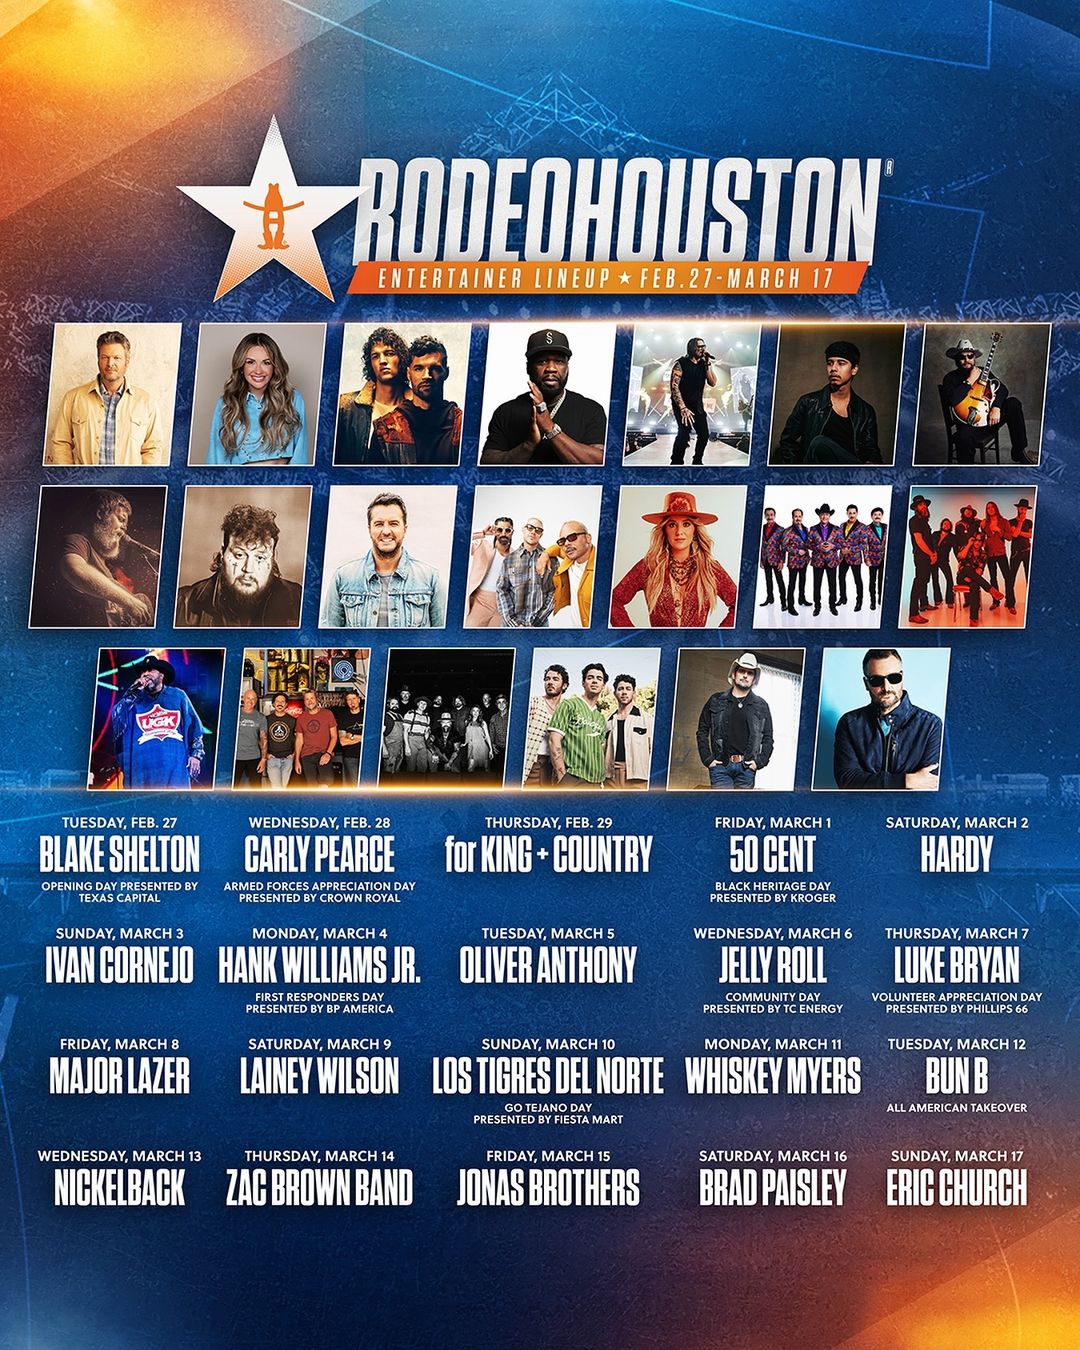 The Rodeo Houston event spans from February 27 to March 17 and top-billed among the list of talent was Blake